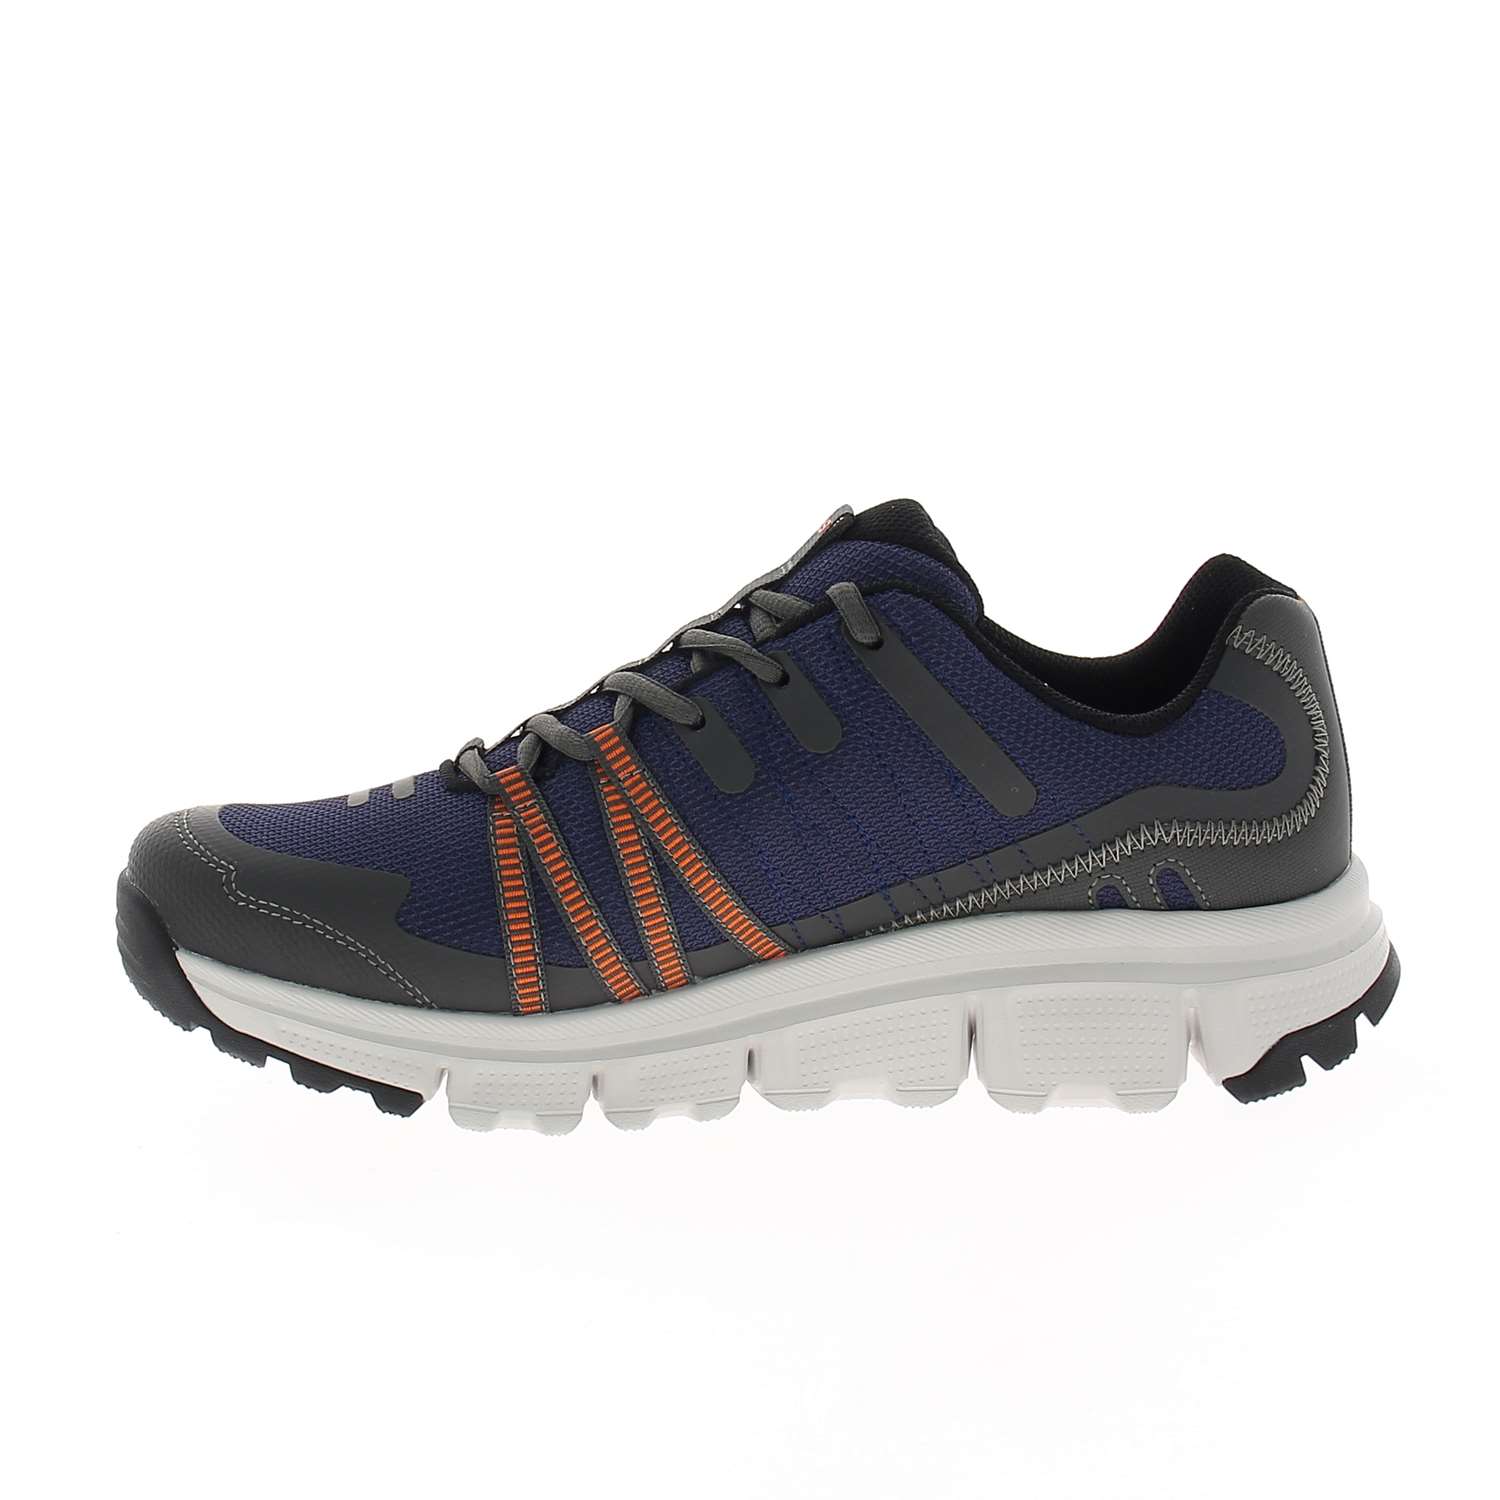 03 - SUMMITS AT - SKECHERS -  - Textile